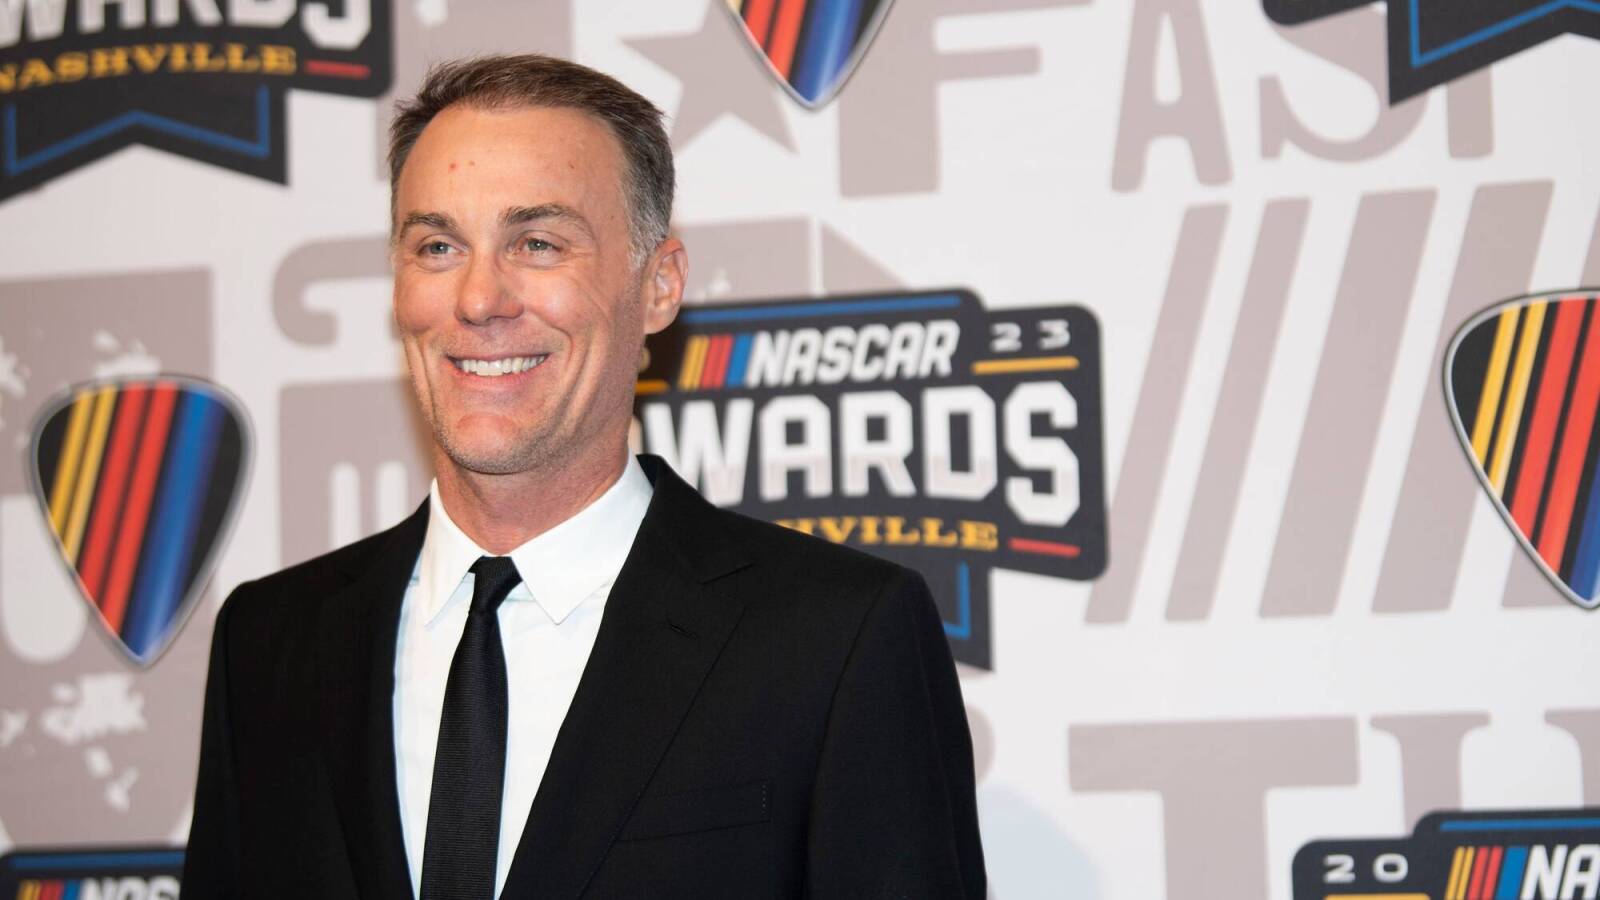 Kevin Harvick disagrees with Larry McReynolds on Denny Hamlin win total this season, concedes 60 wins is toast